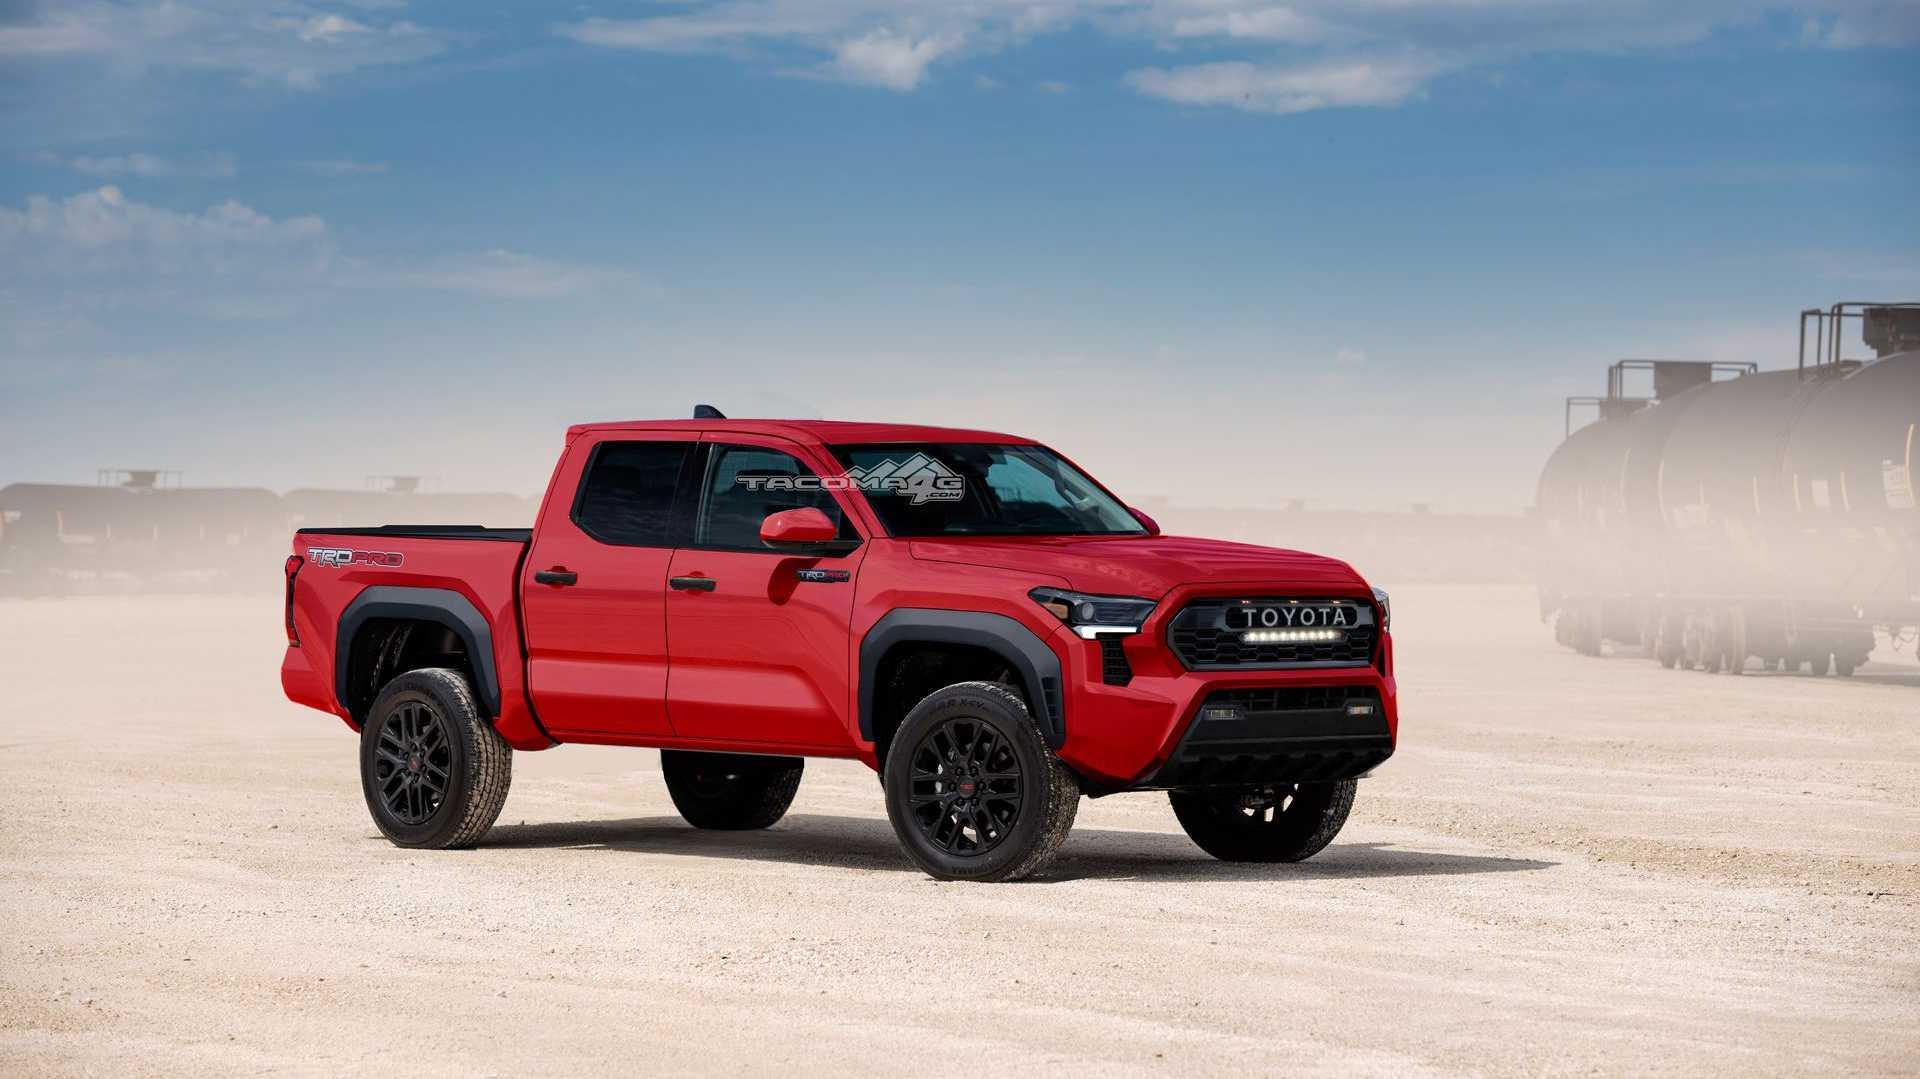 Toyota Taa Trd Pro Rendered Based On Patent Image